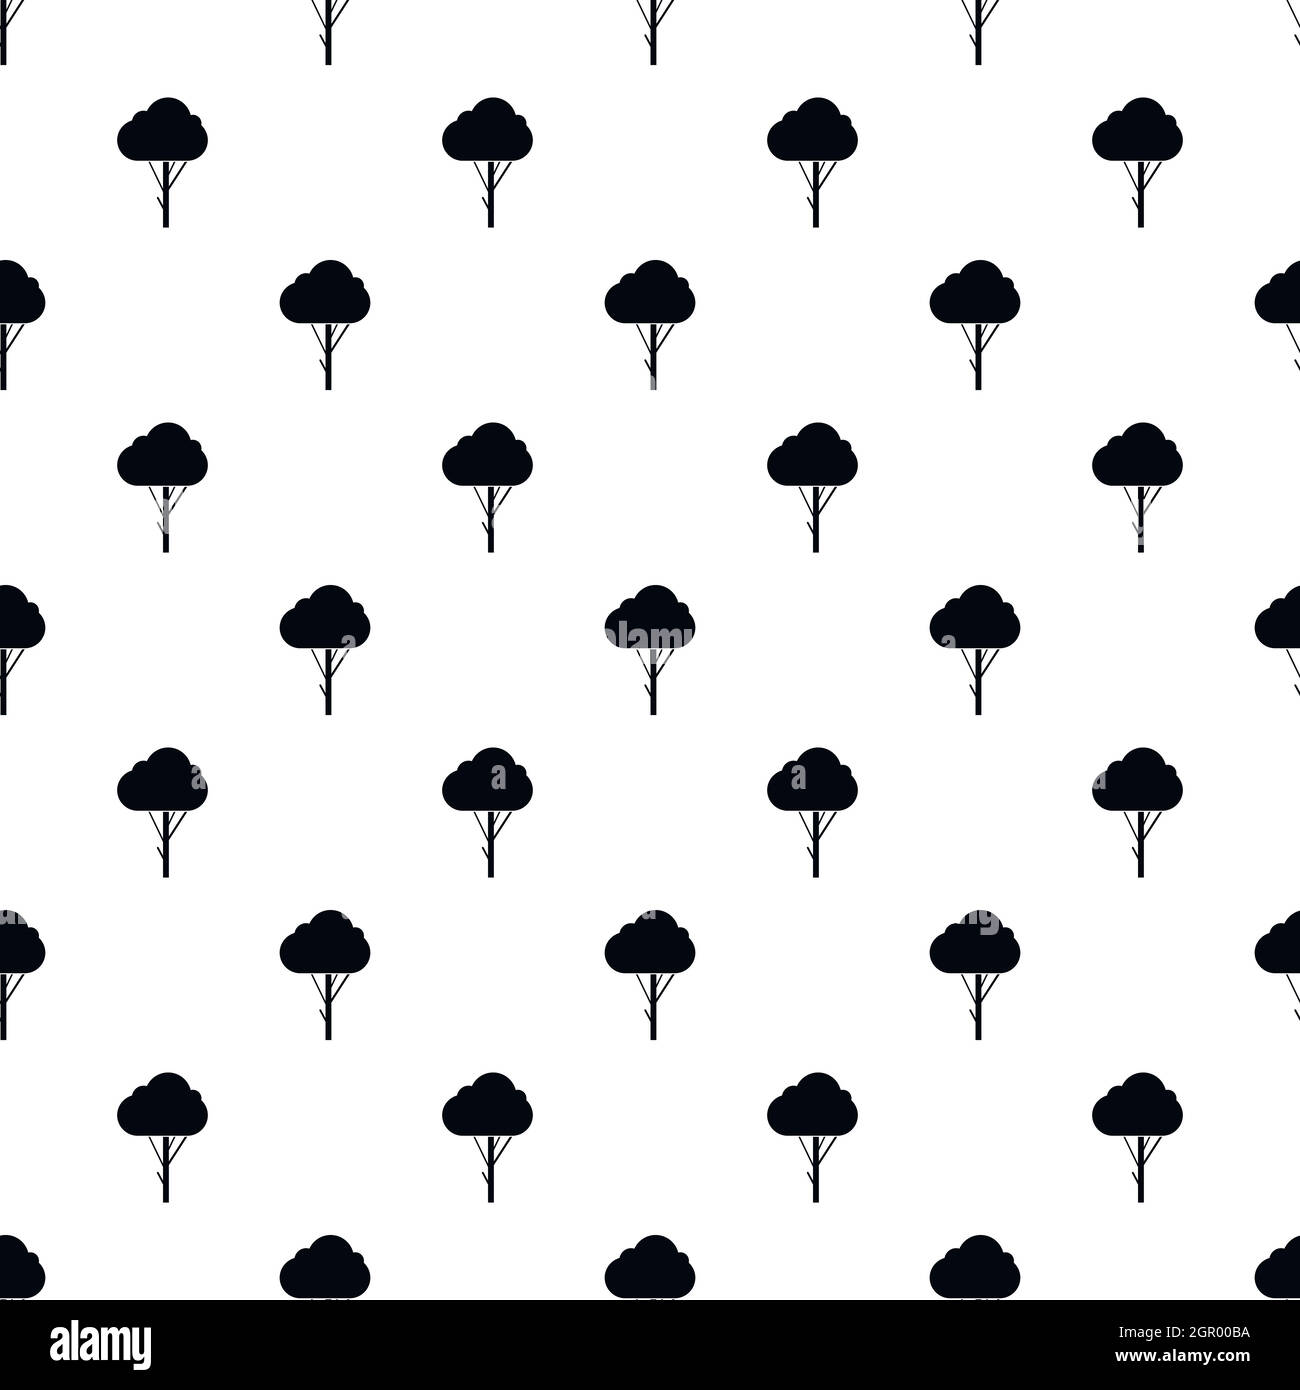 Fluffy tree pattern, simple style Stock Vector